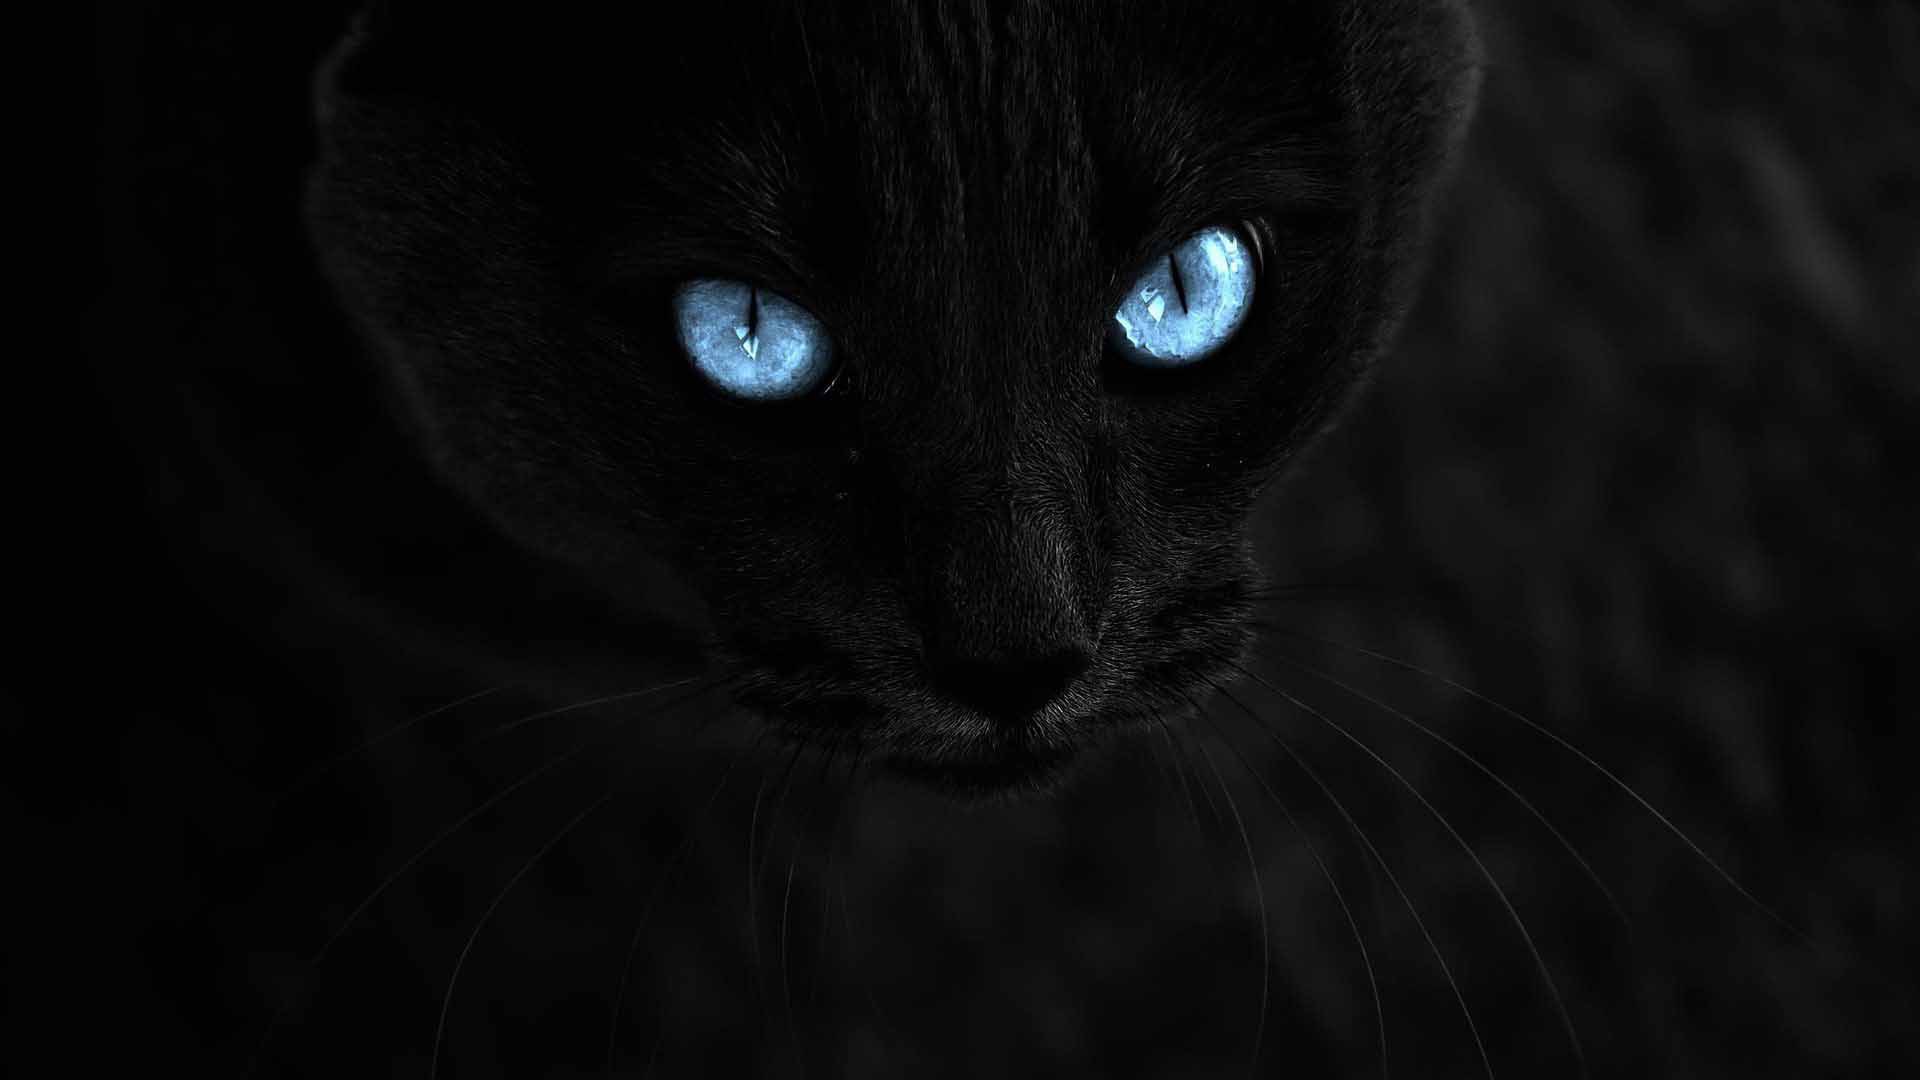 Black cat with blue eyes on a black background wallpapers and images